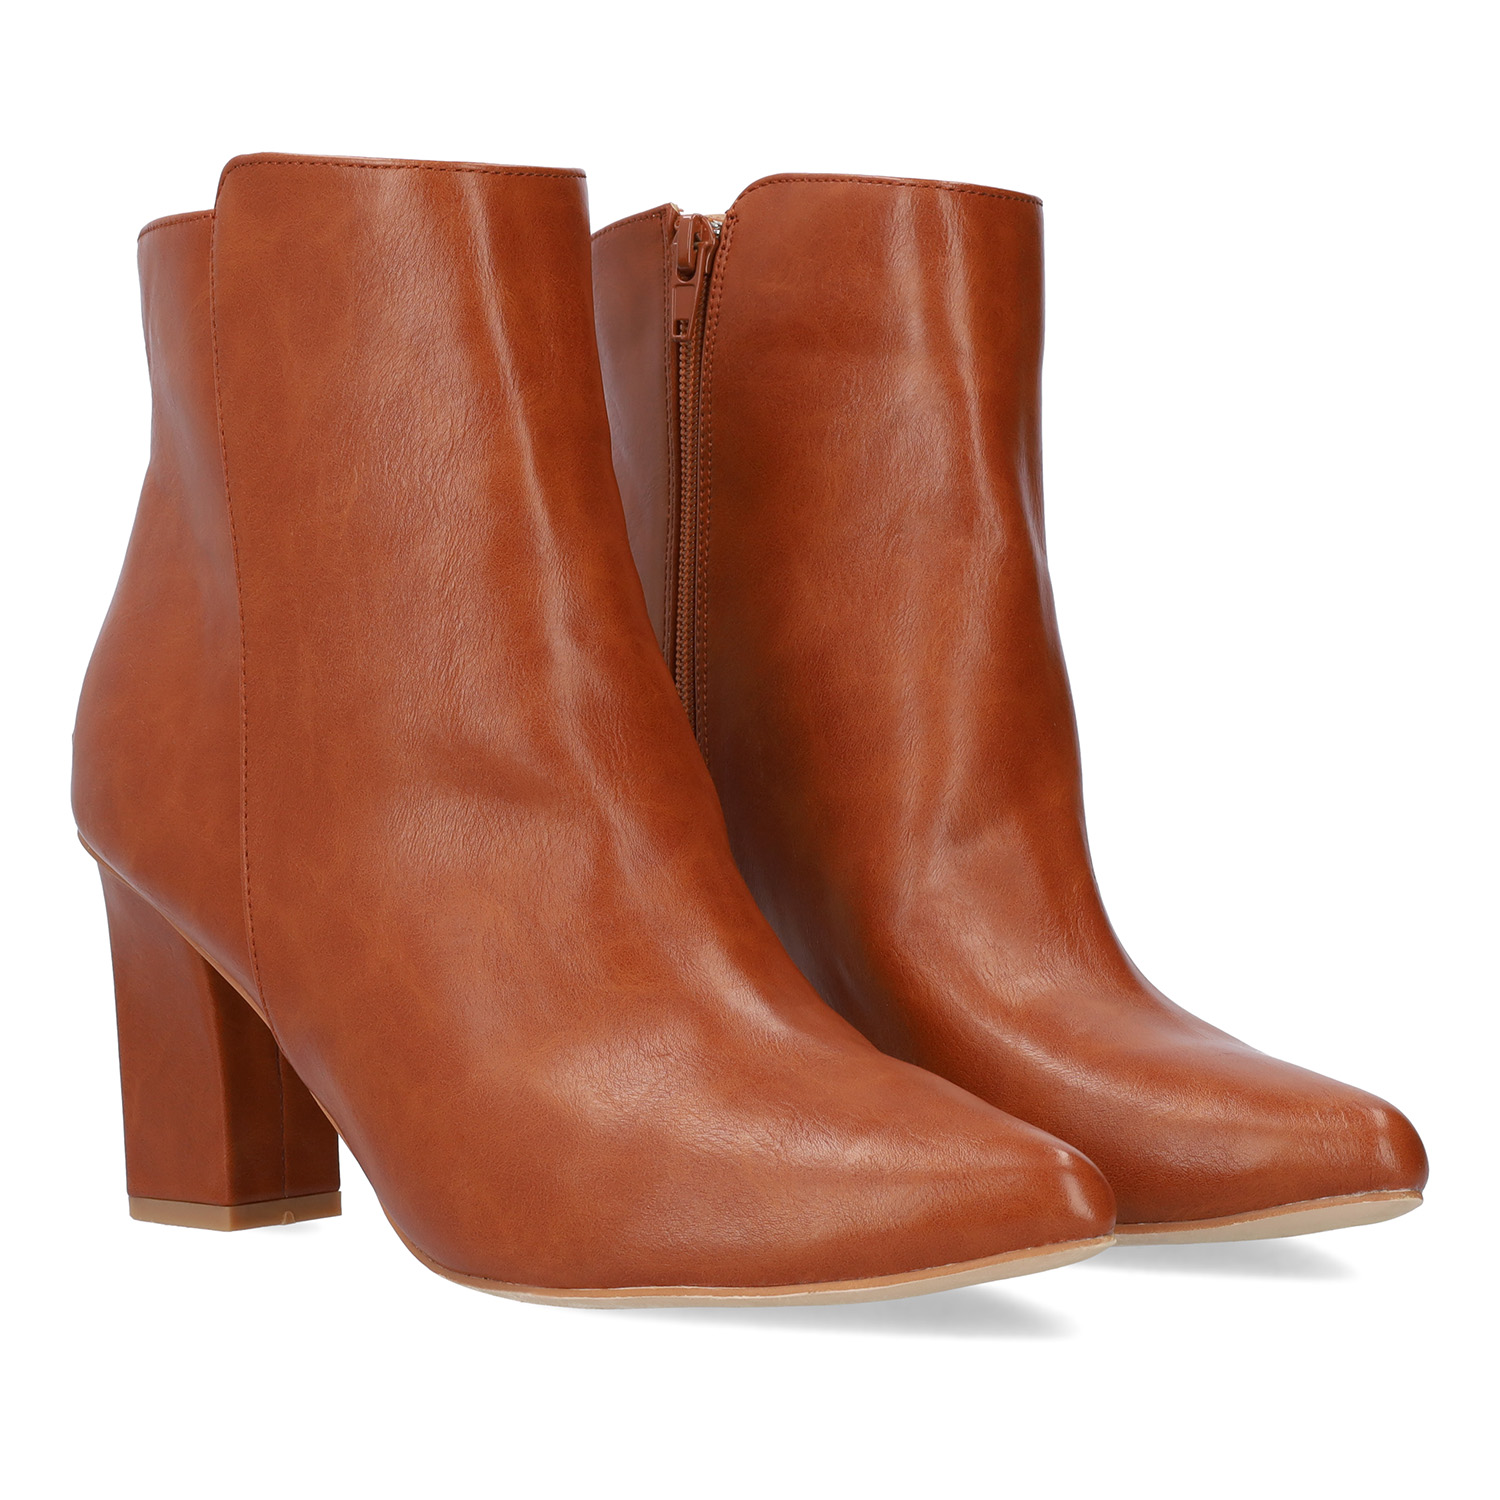 Heeled booties in brown faux leather.